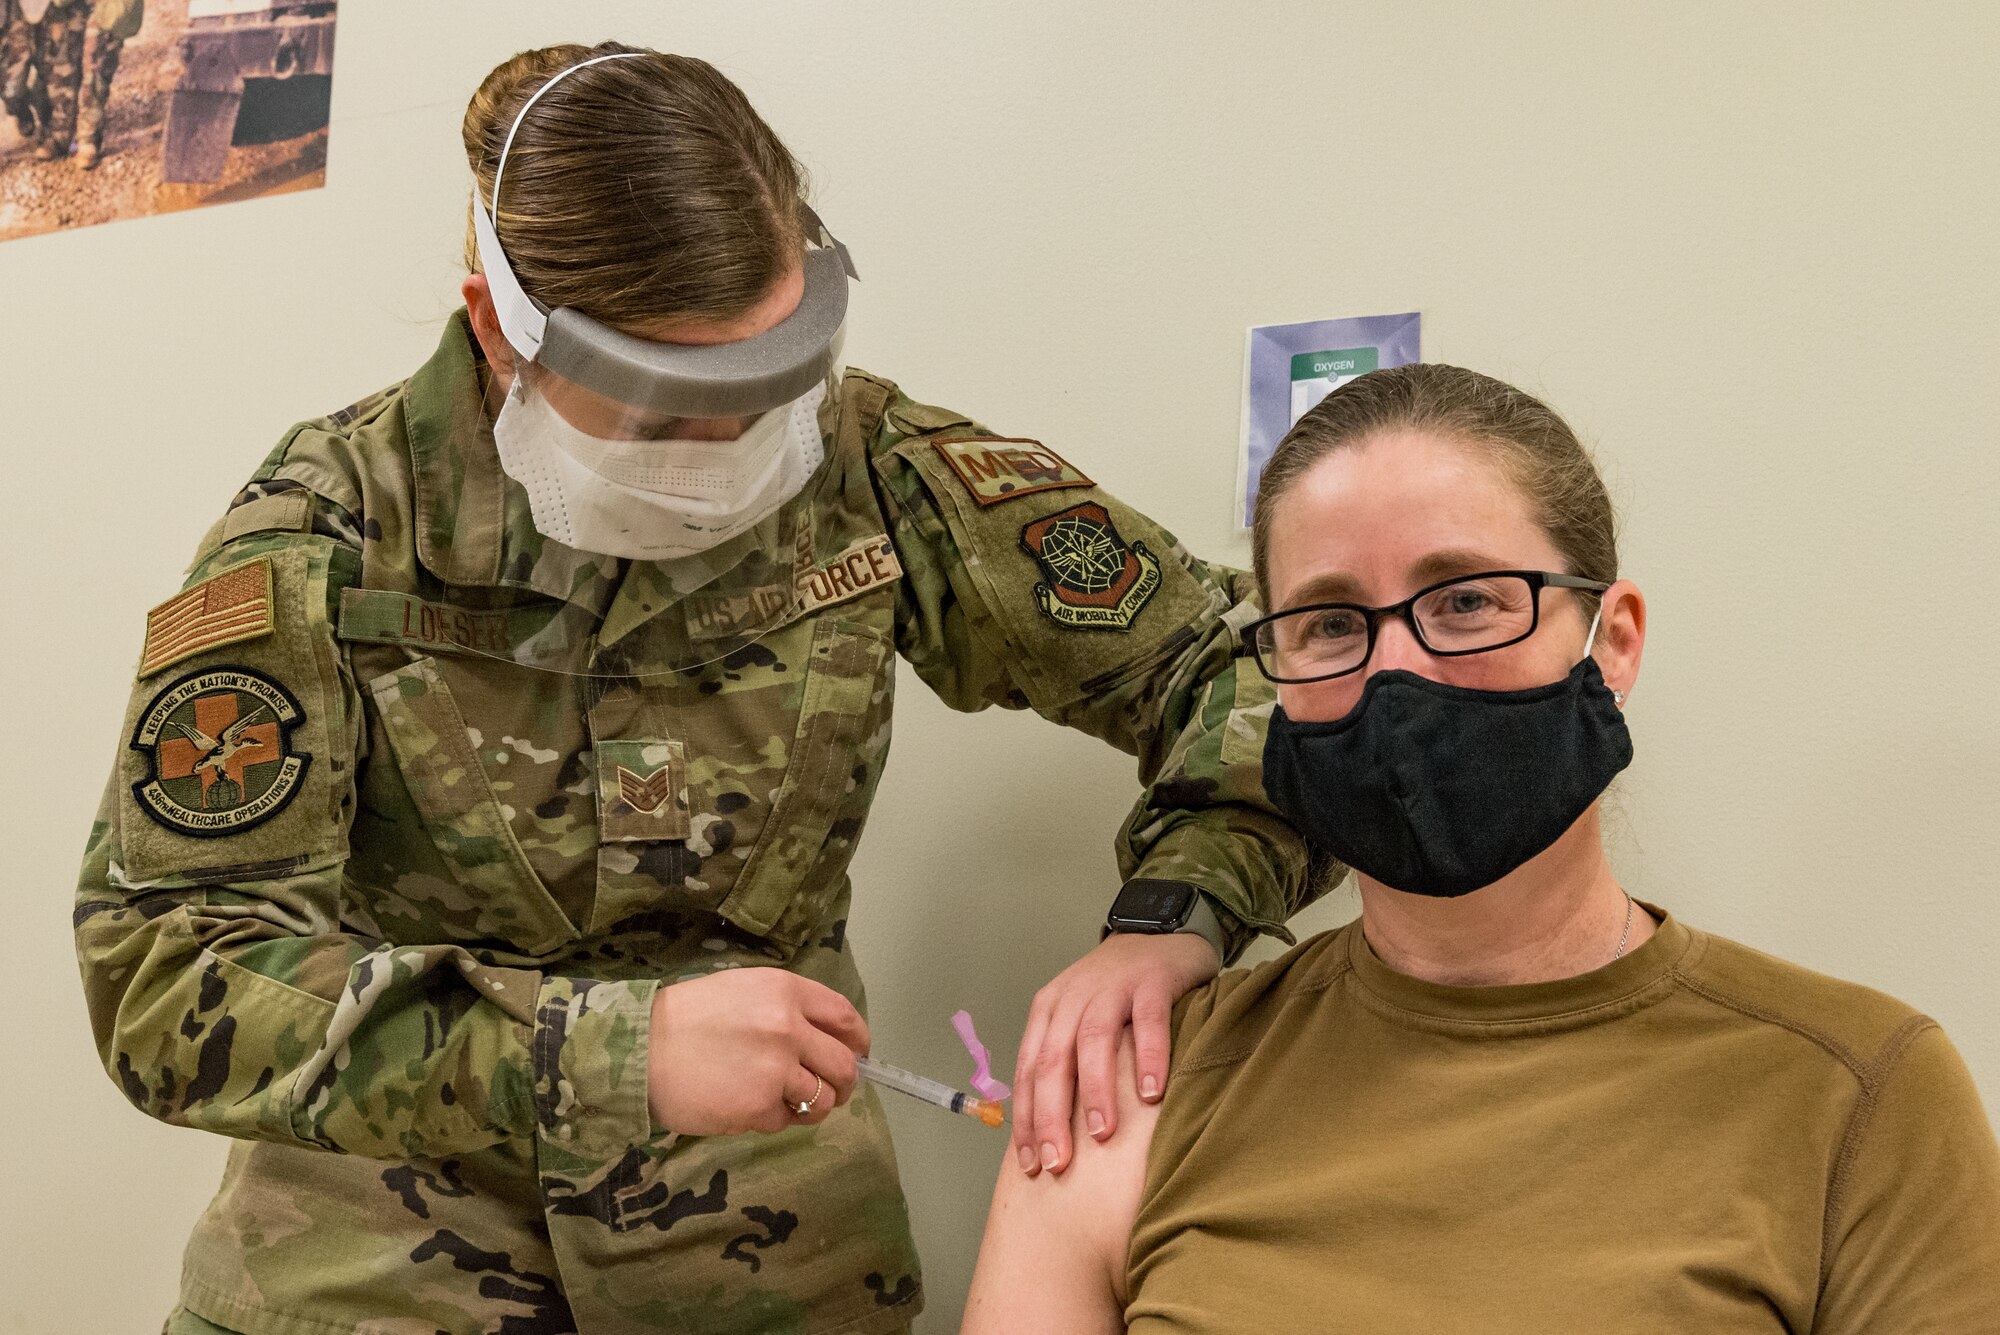 Lt. Col. Brittany Nutt, 436th Health Care Operations Squadron commander, is administered the COVID-19 vaccine by Staff Sgt. Kelsey Loeser, 436th Medical Group unit training manager, Jan. 15, 2021, at Dover Air Force Base, Delaware. Nutt was among the first Team Dover frontline workers who voluntarily received the vaccine in concurrence with Department of Defense guidance. The vaccine was granted emergency use authorization by the U.S. Food and Drug Administration for use in prevention of COVID-19. (U.S. Air Force photo by Roland Balik)